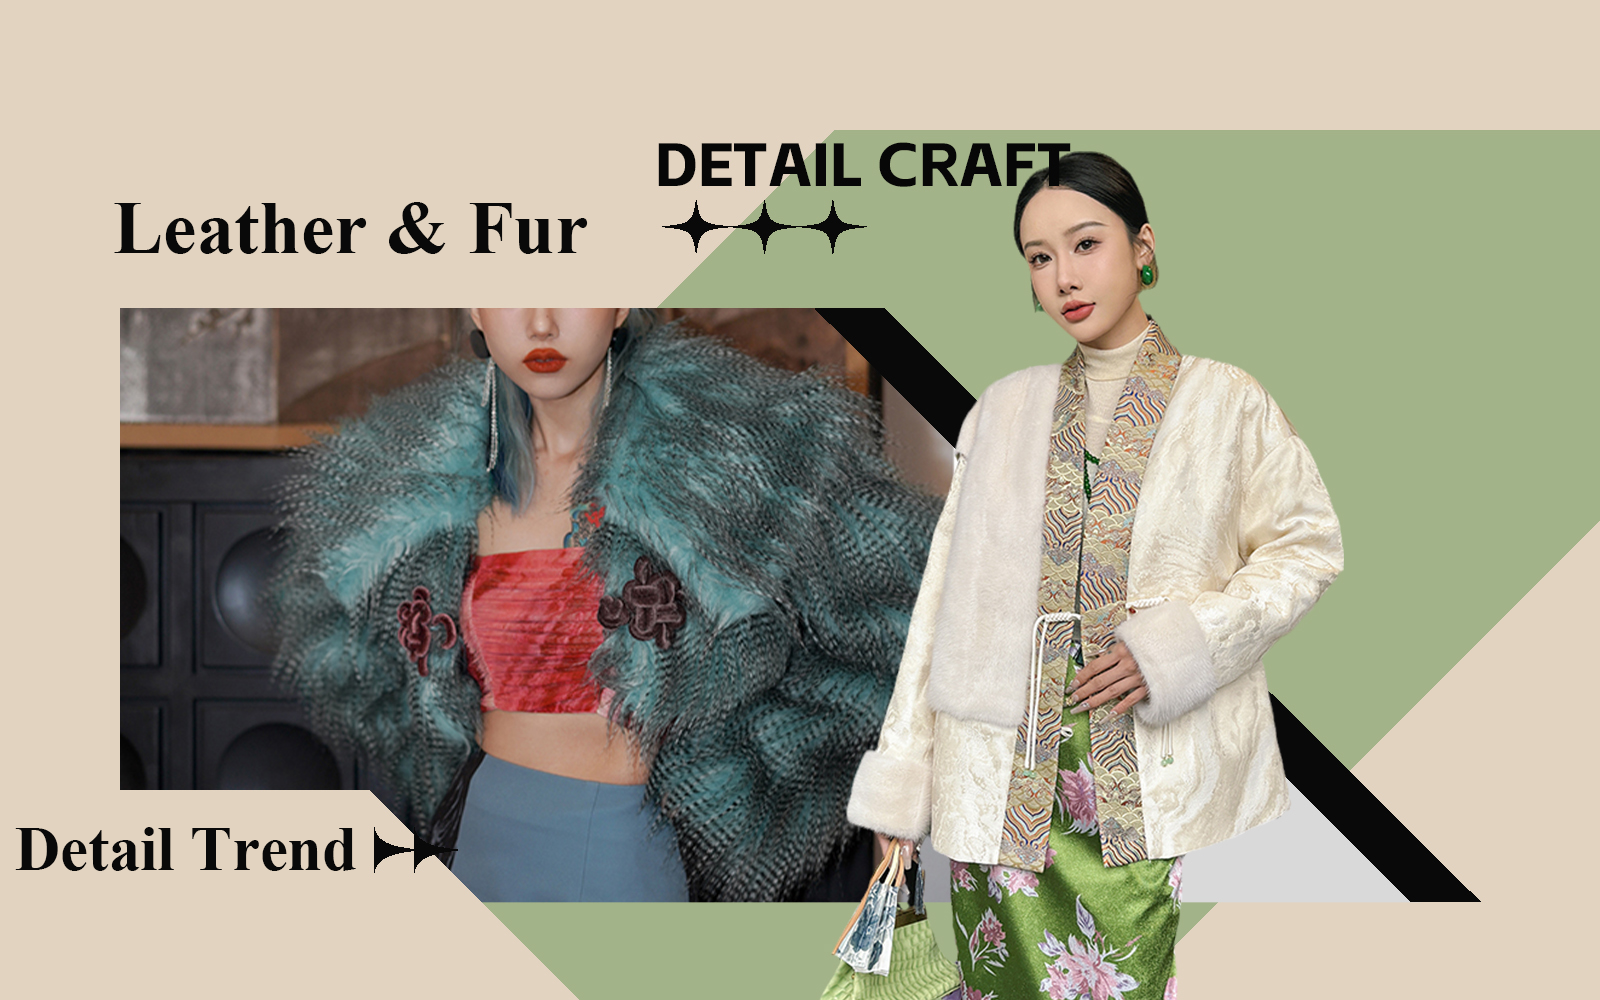 New Chinese Fur -- The Detail & Craft Trend for Women's Leather & Fur